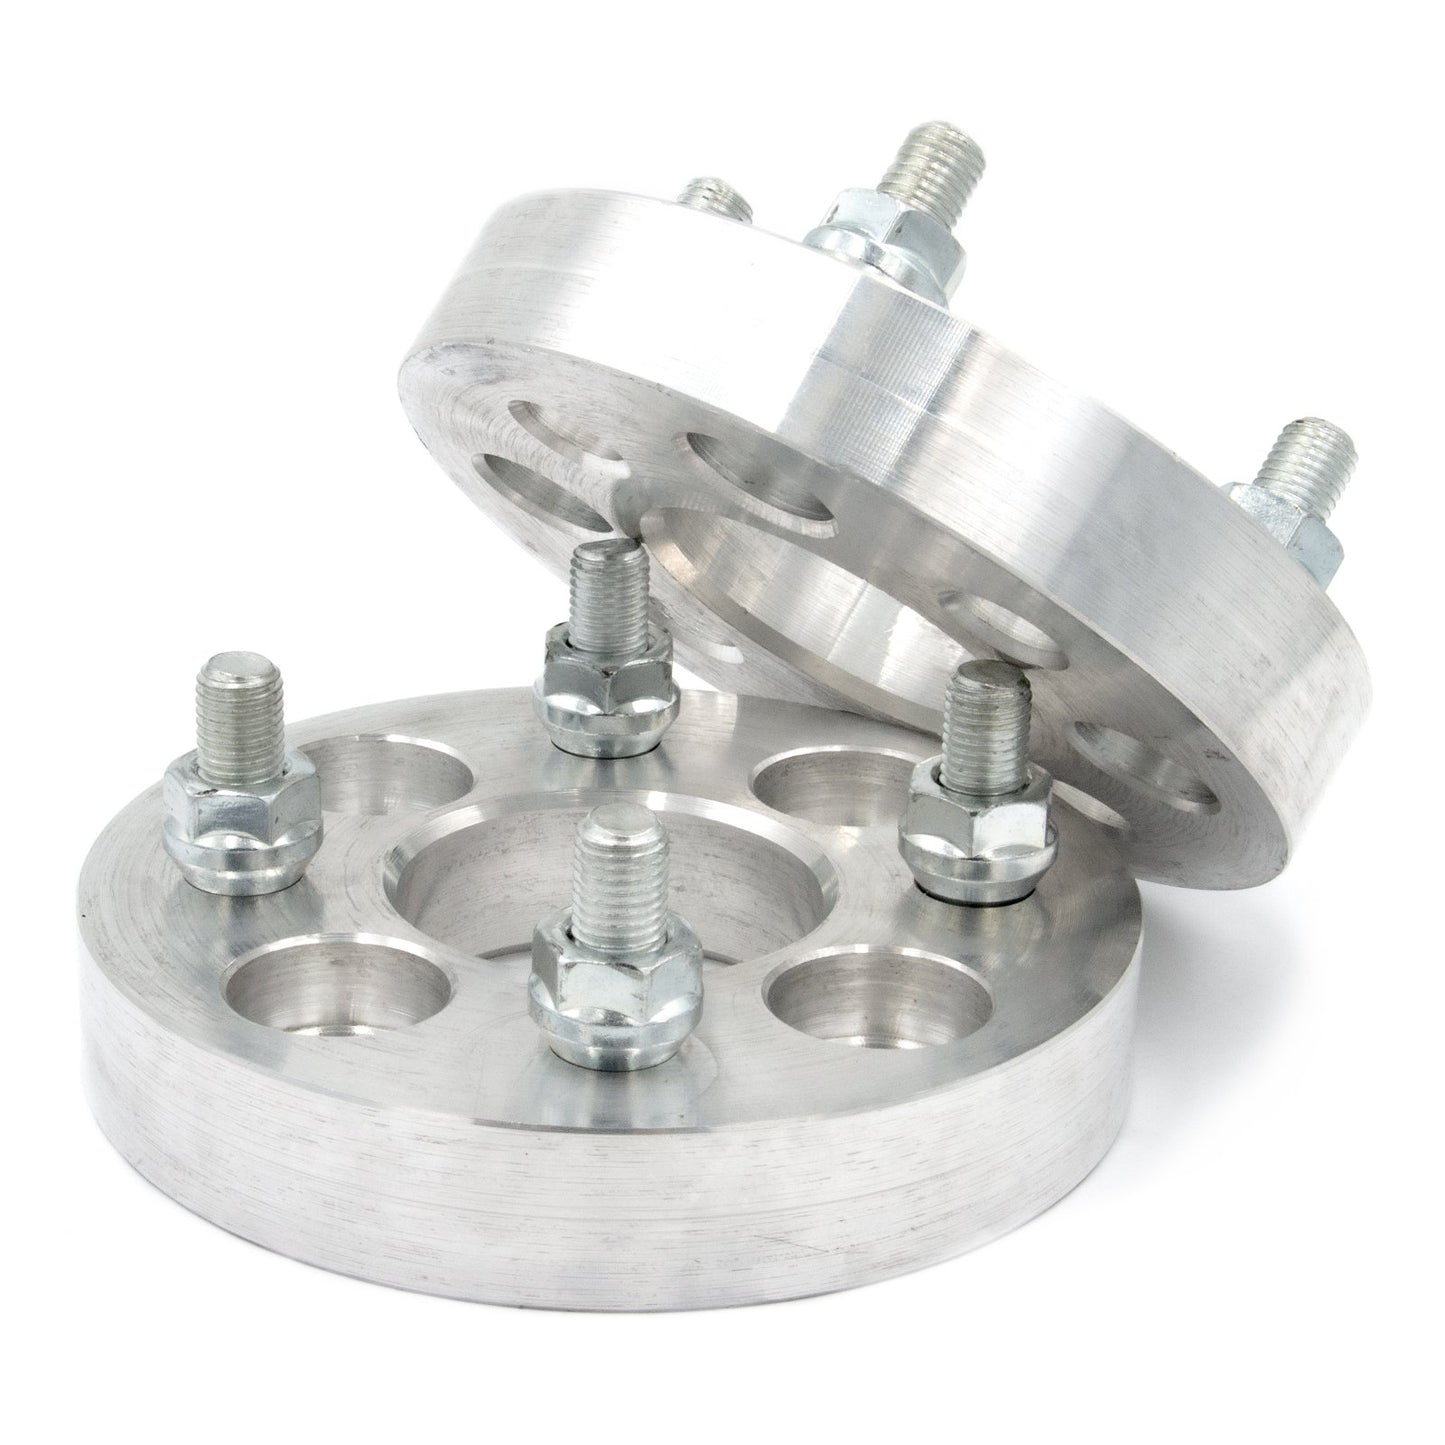 4x110 to 4x115 Wheel Spacer/Adapter - Thickness: 3/4"- 4"